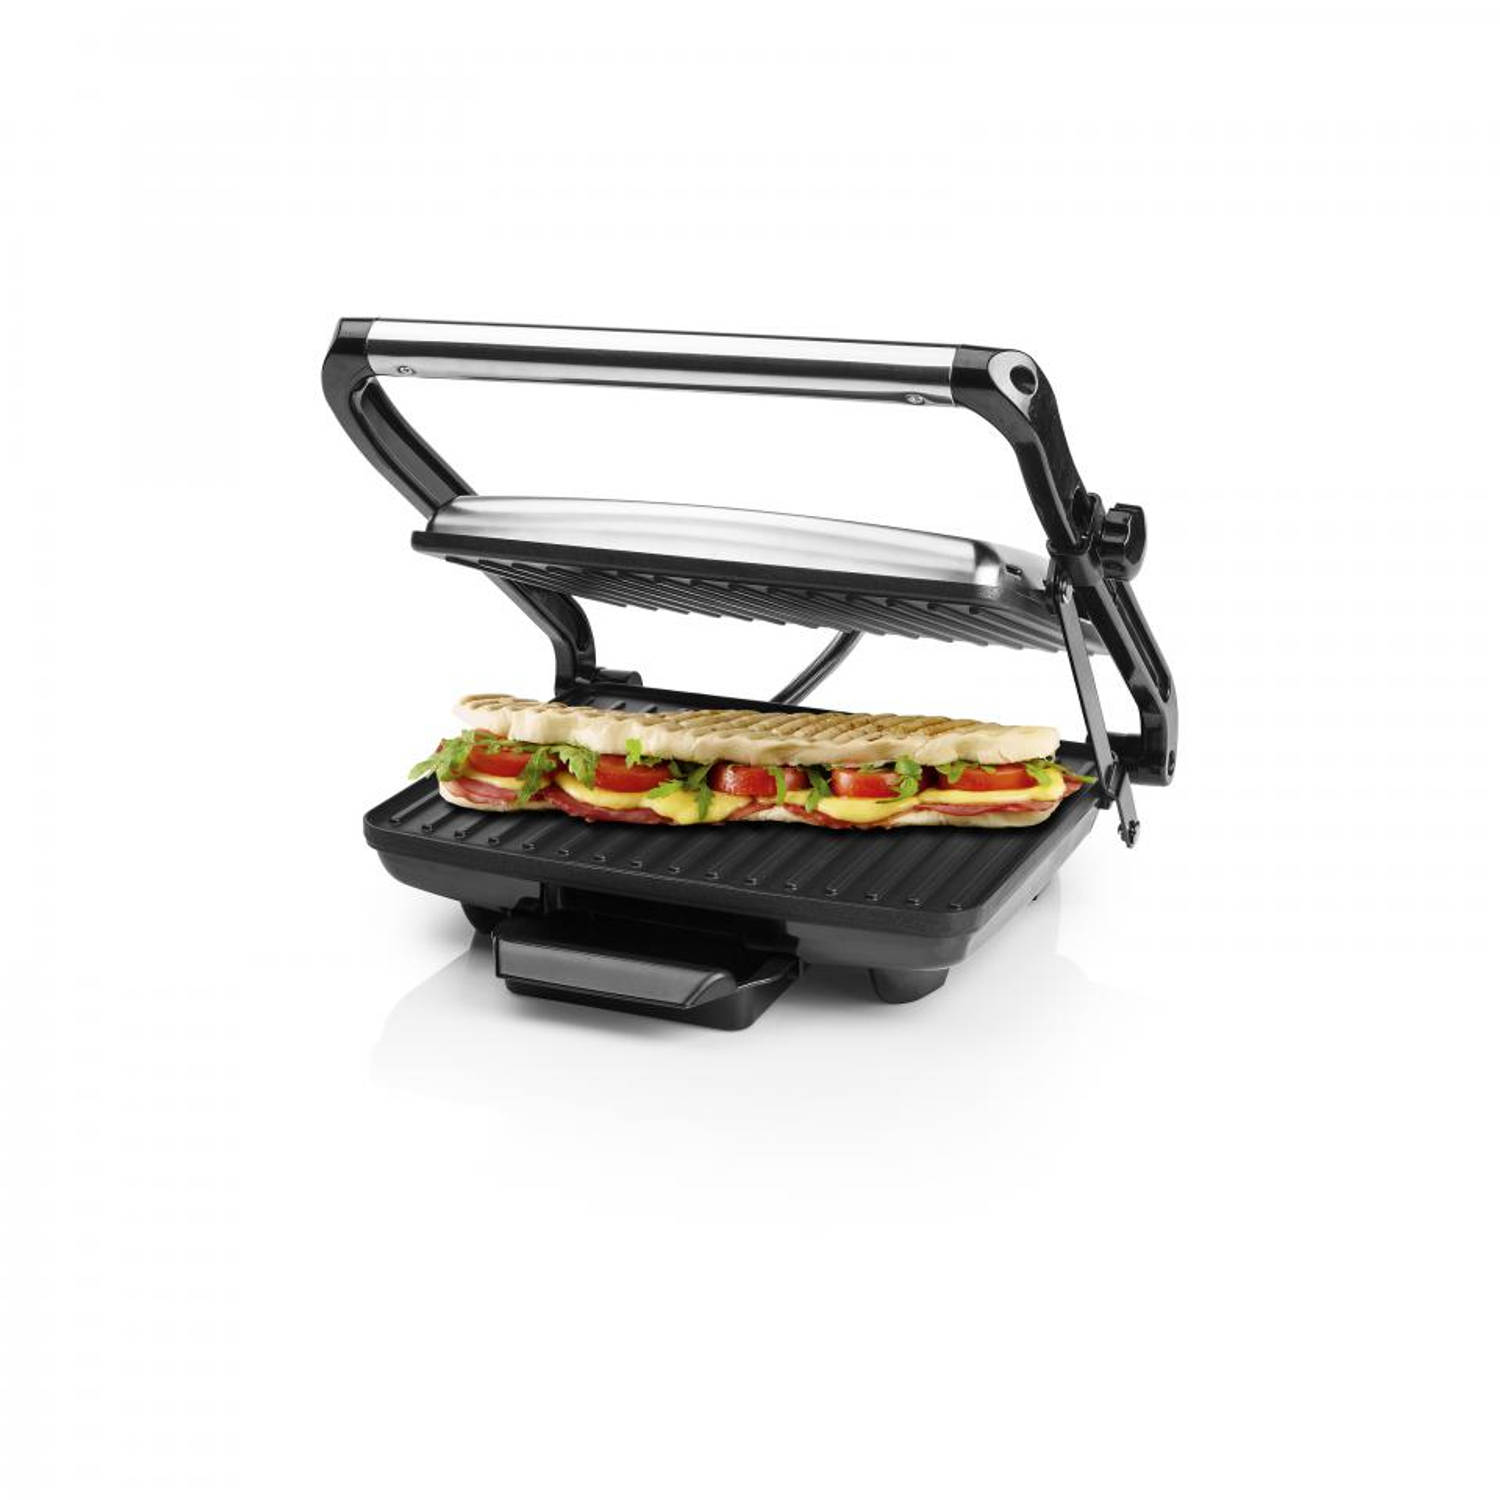 contactgrill/panini grill | Blokker